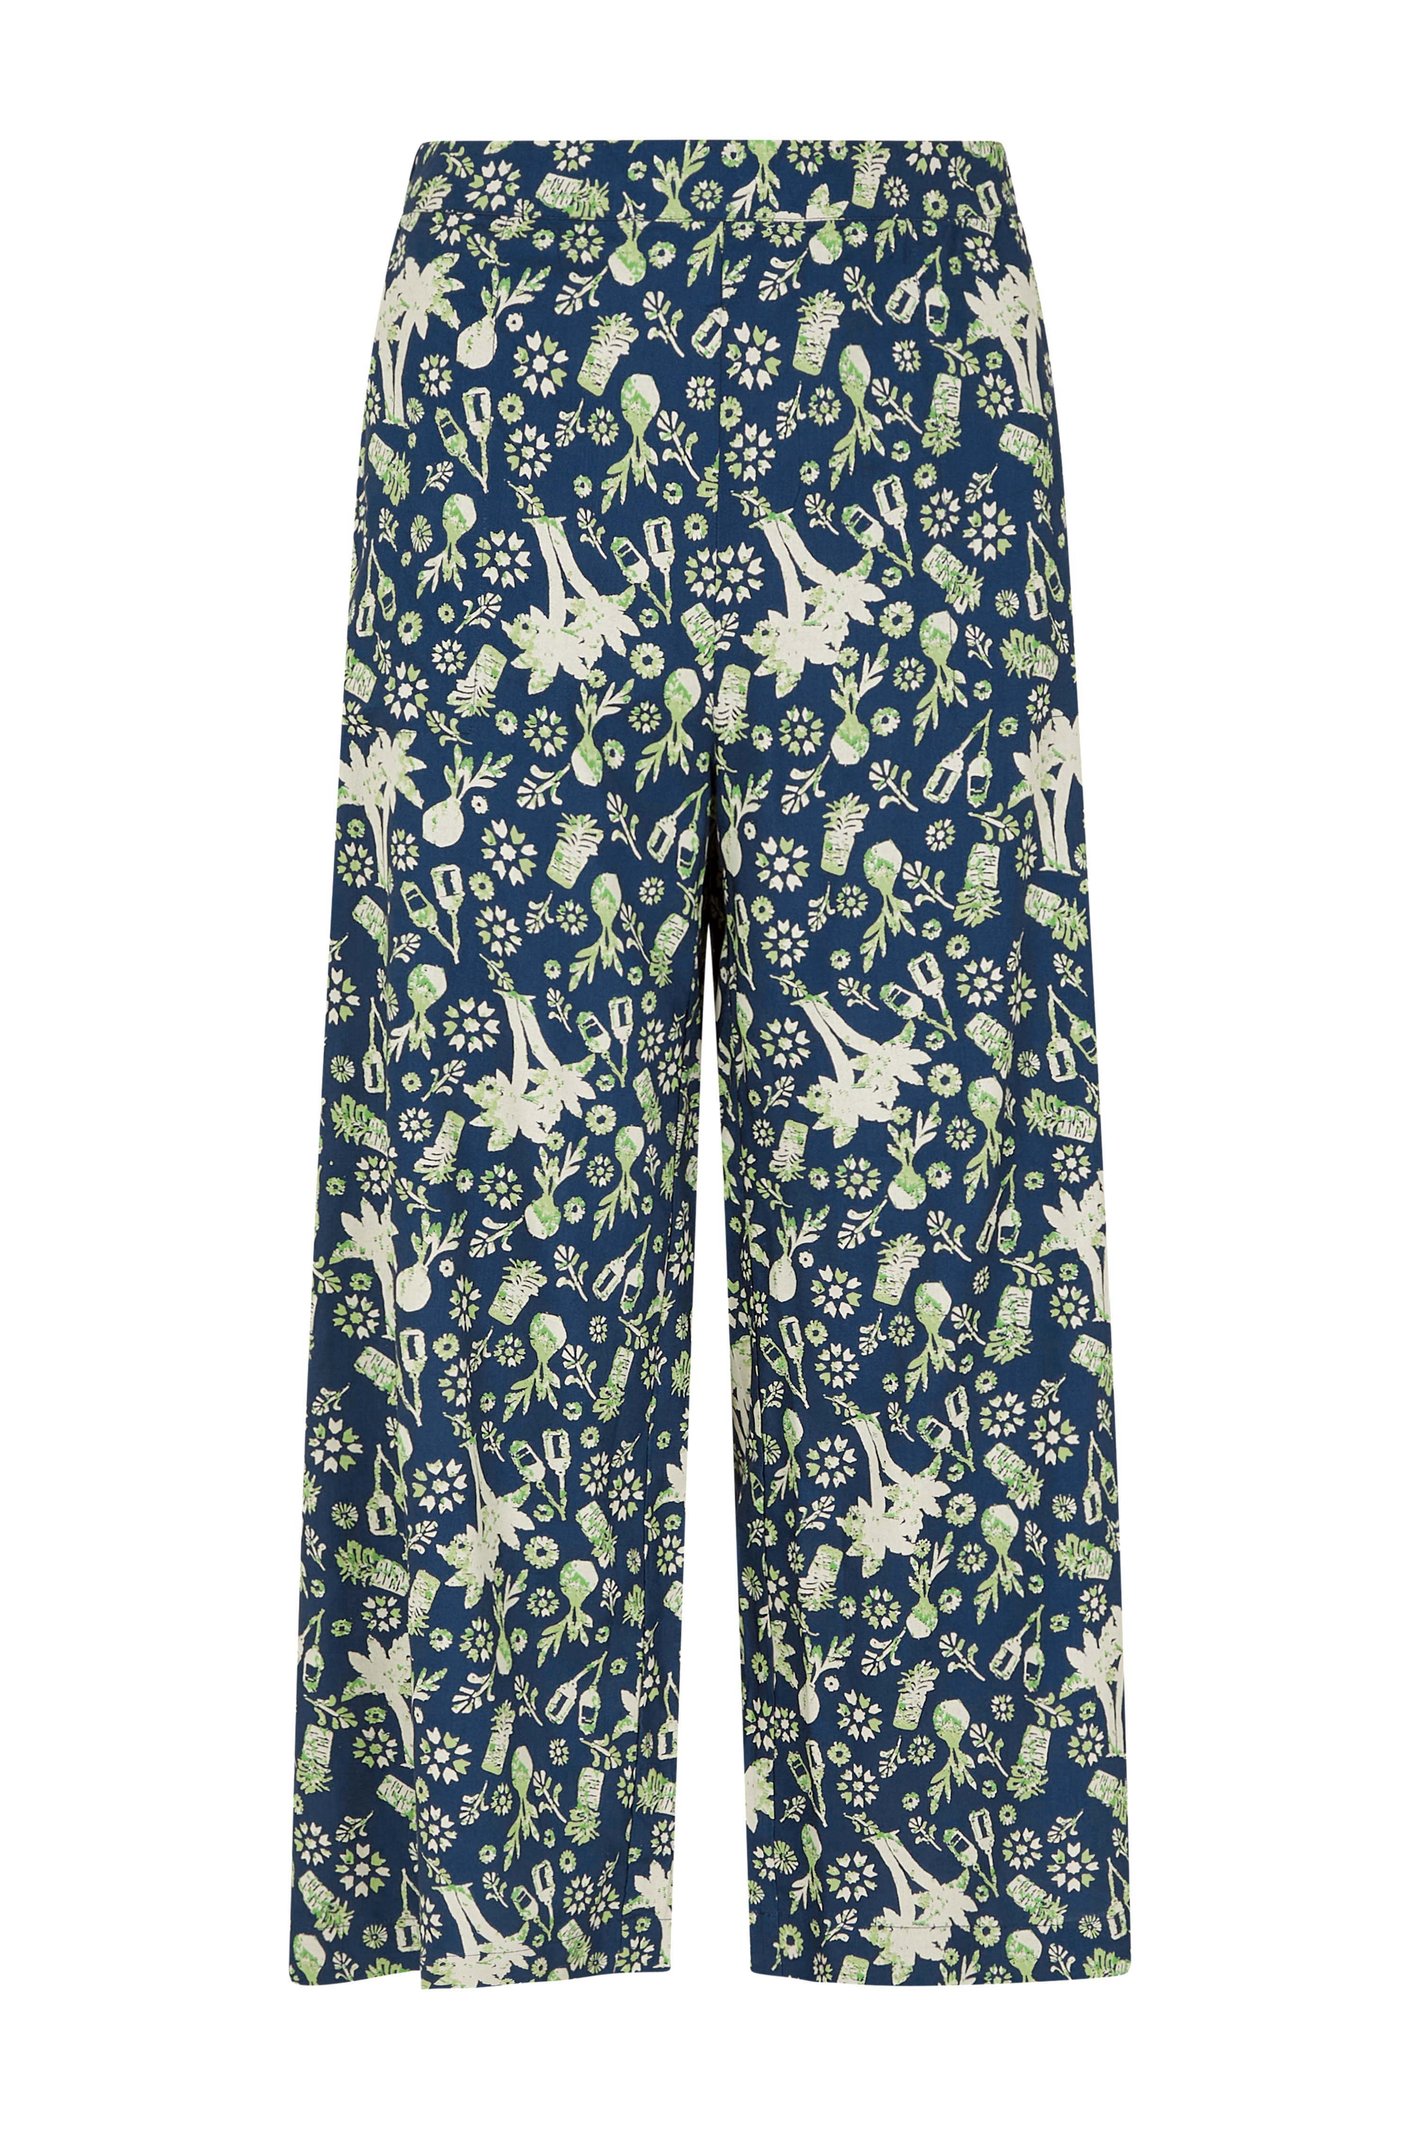 Weird Fish Tresco Eco Viscose Printed Wide Leg Cropped Trousers Ensign Blue Size 18